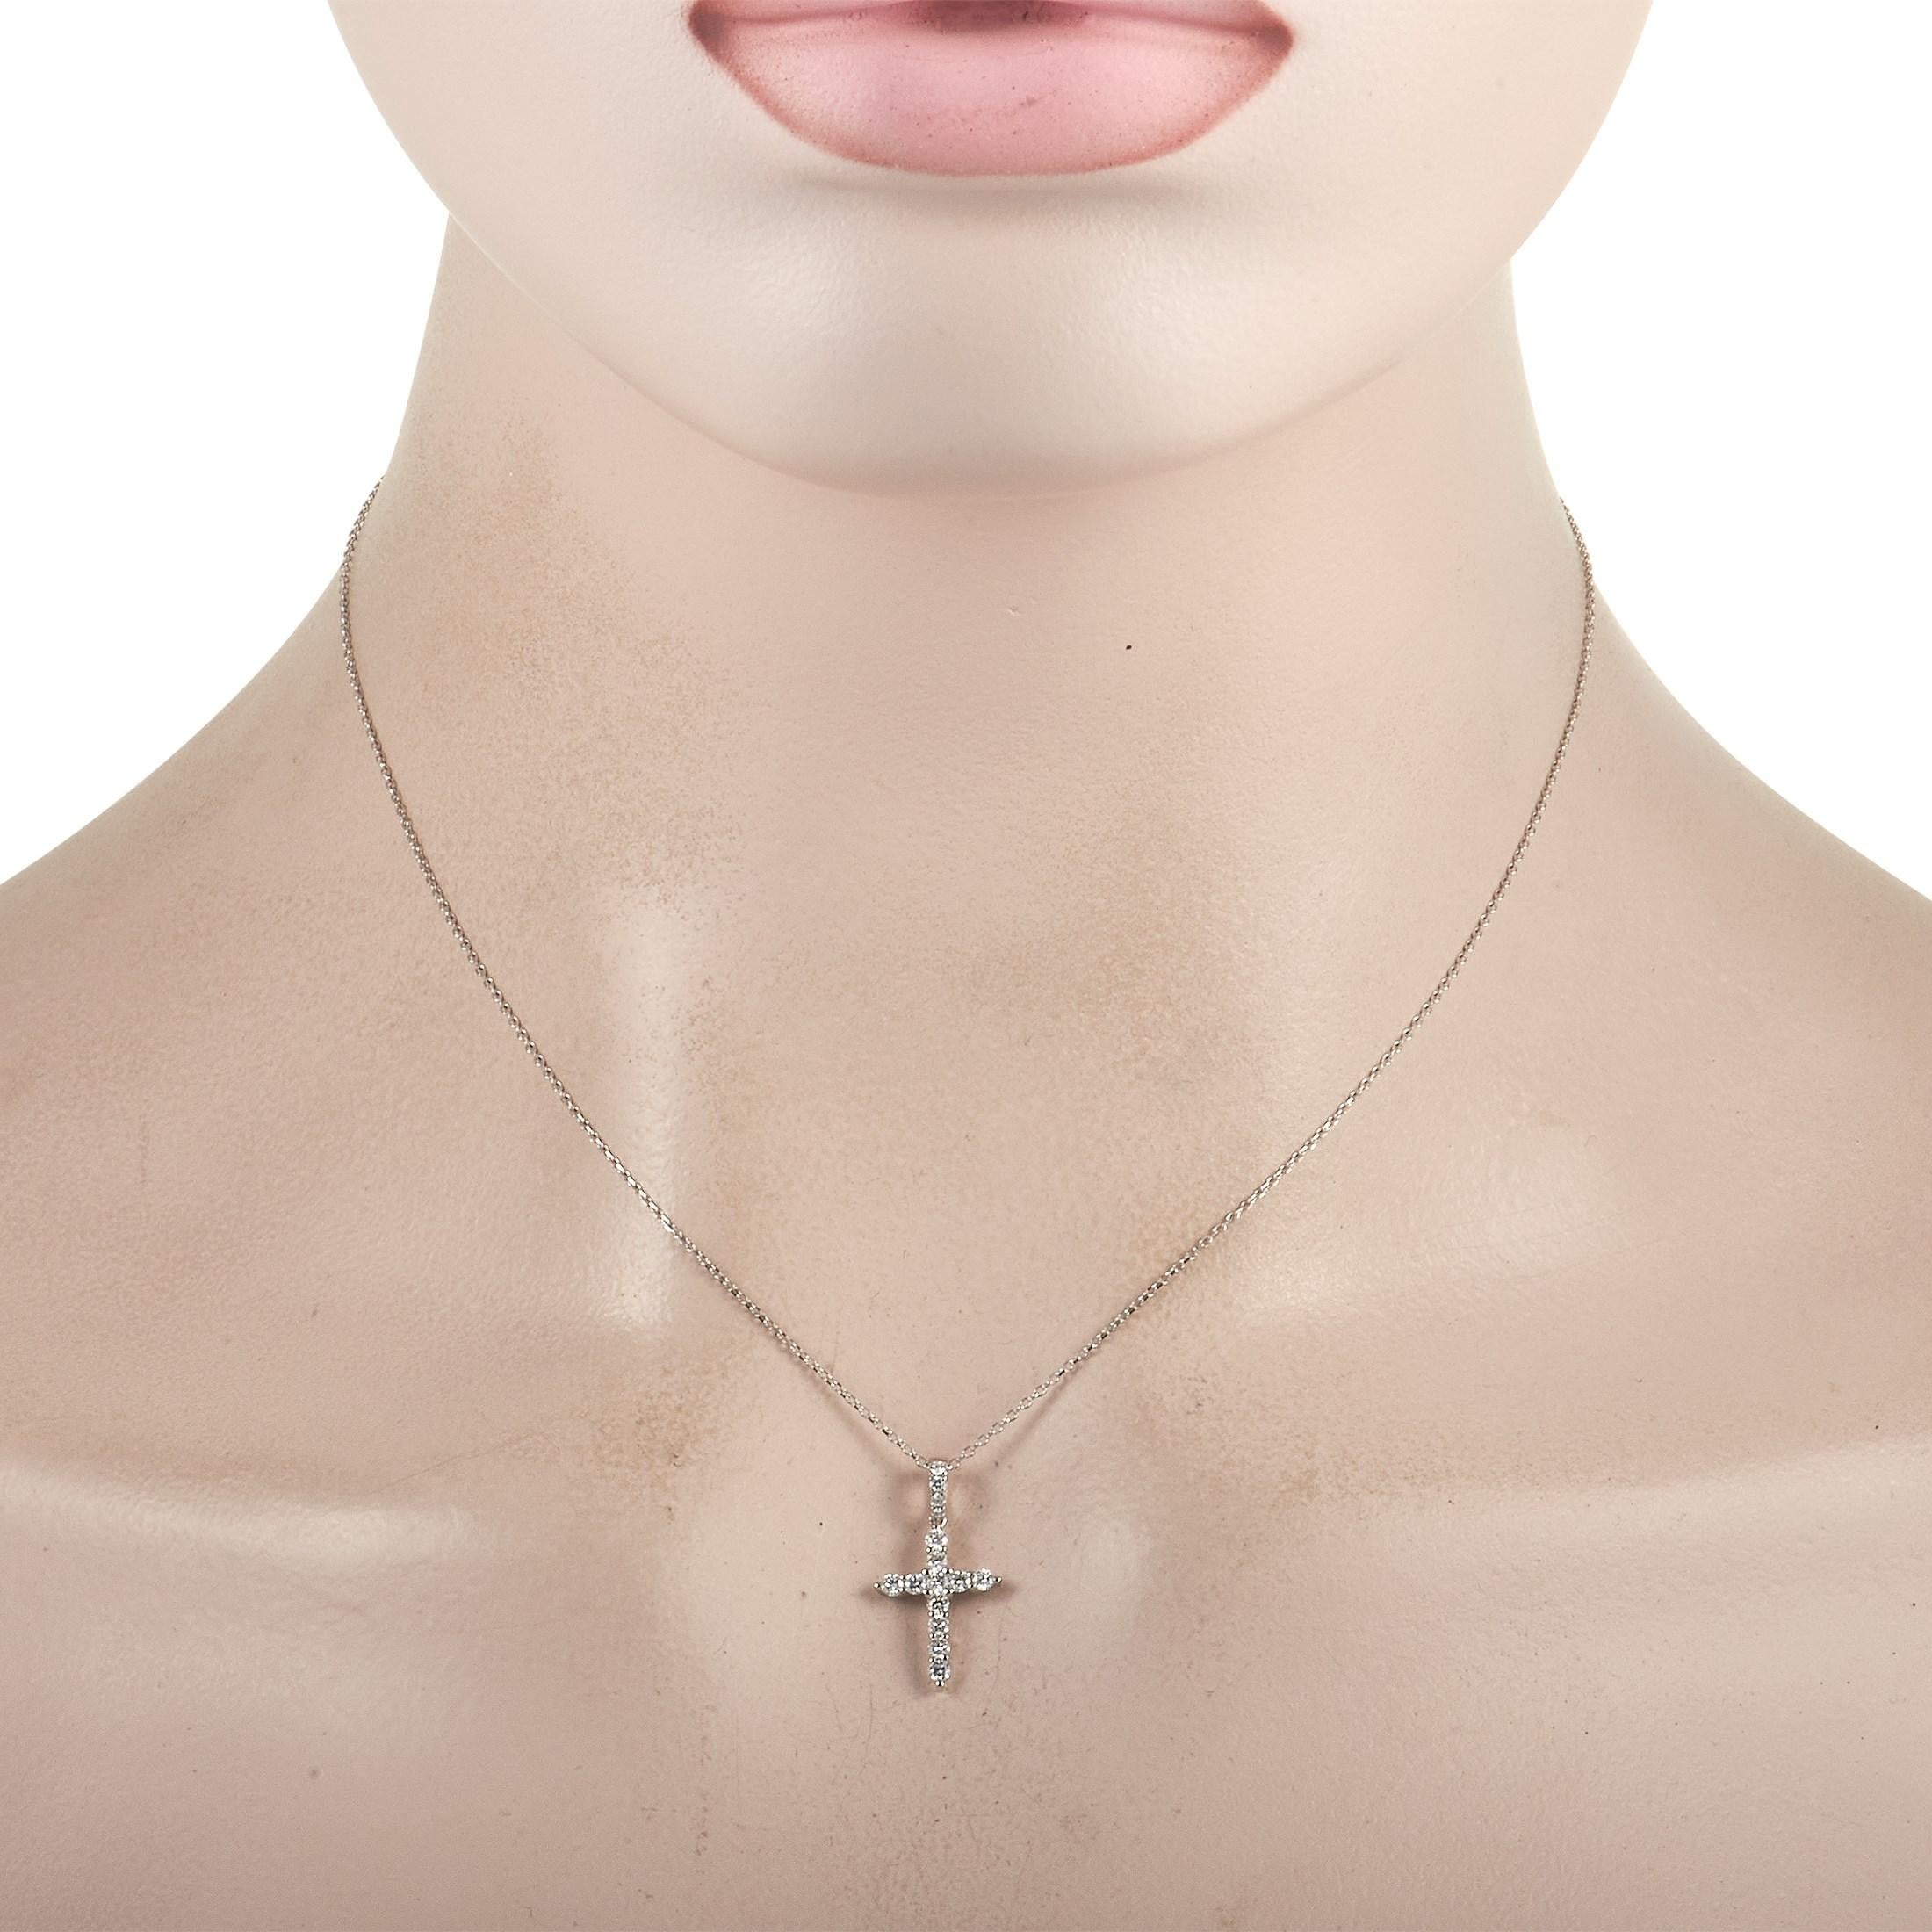 Display your commitment to your Christian faith with this LB Exclusive 18K White Gold 0.38 ct Diamond Cross Pendant Necklace. Suspending along a barely-there 16